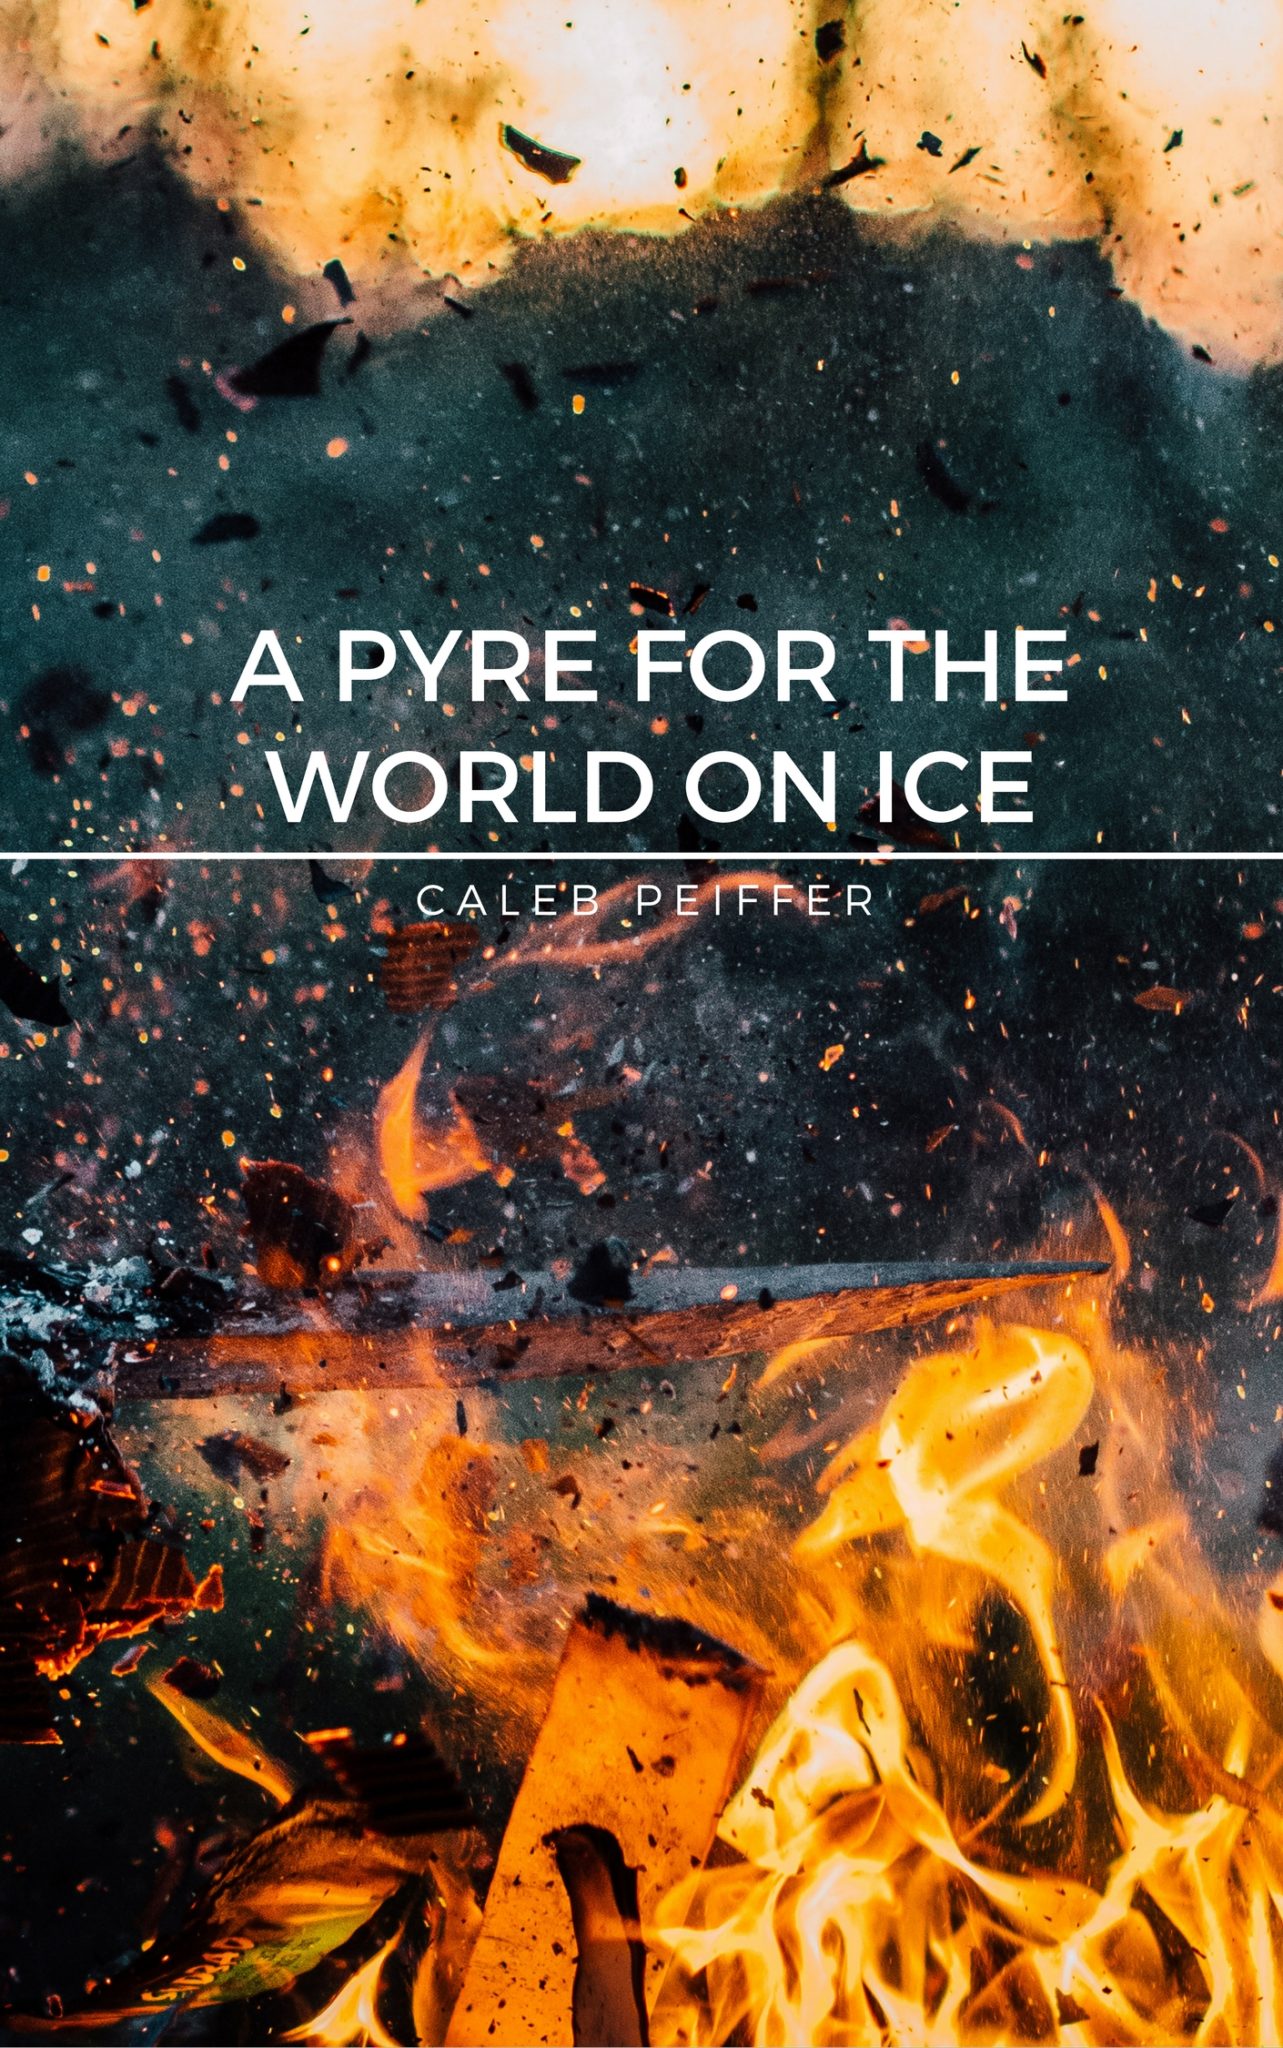 FREE: A Pyre for the World on Ice by Caleb Peiffer